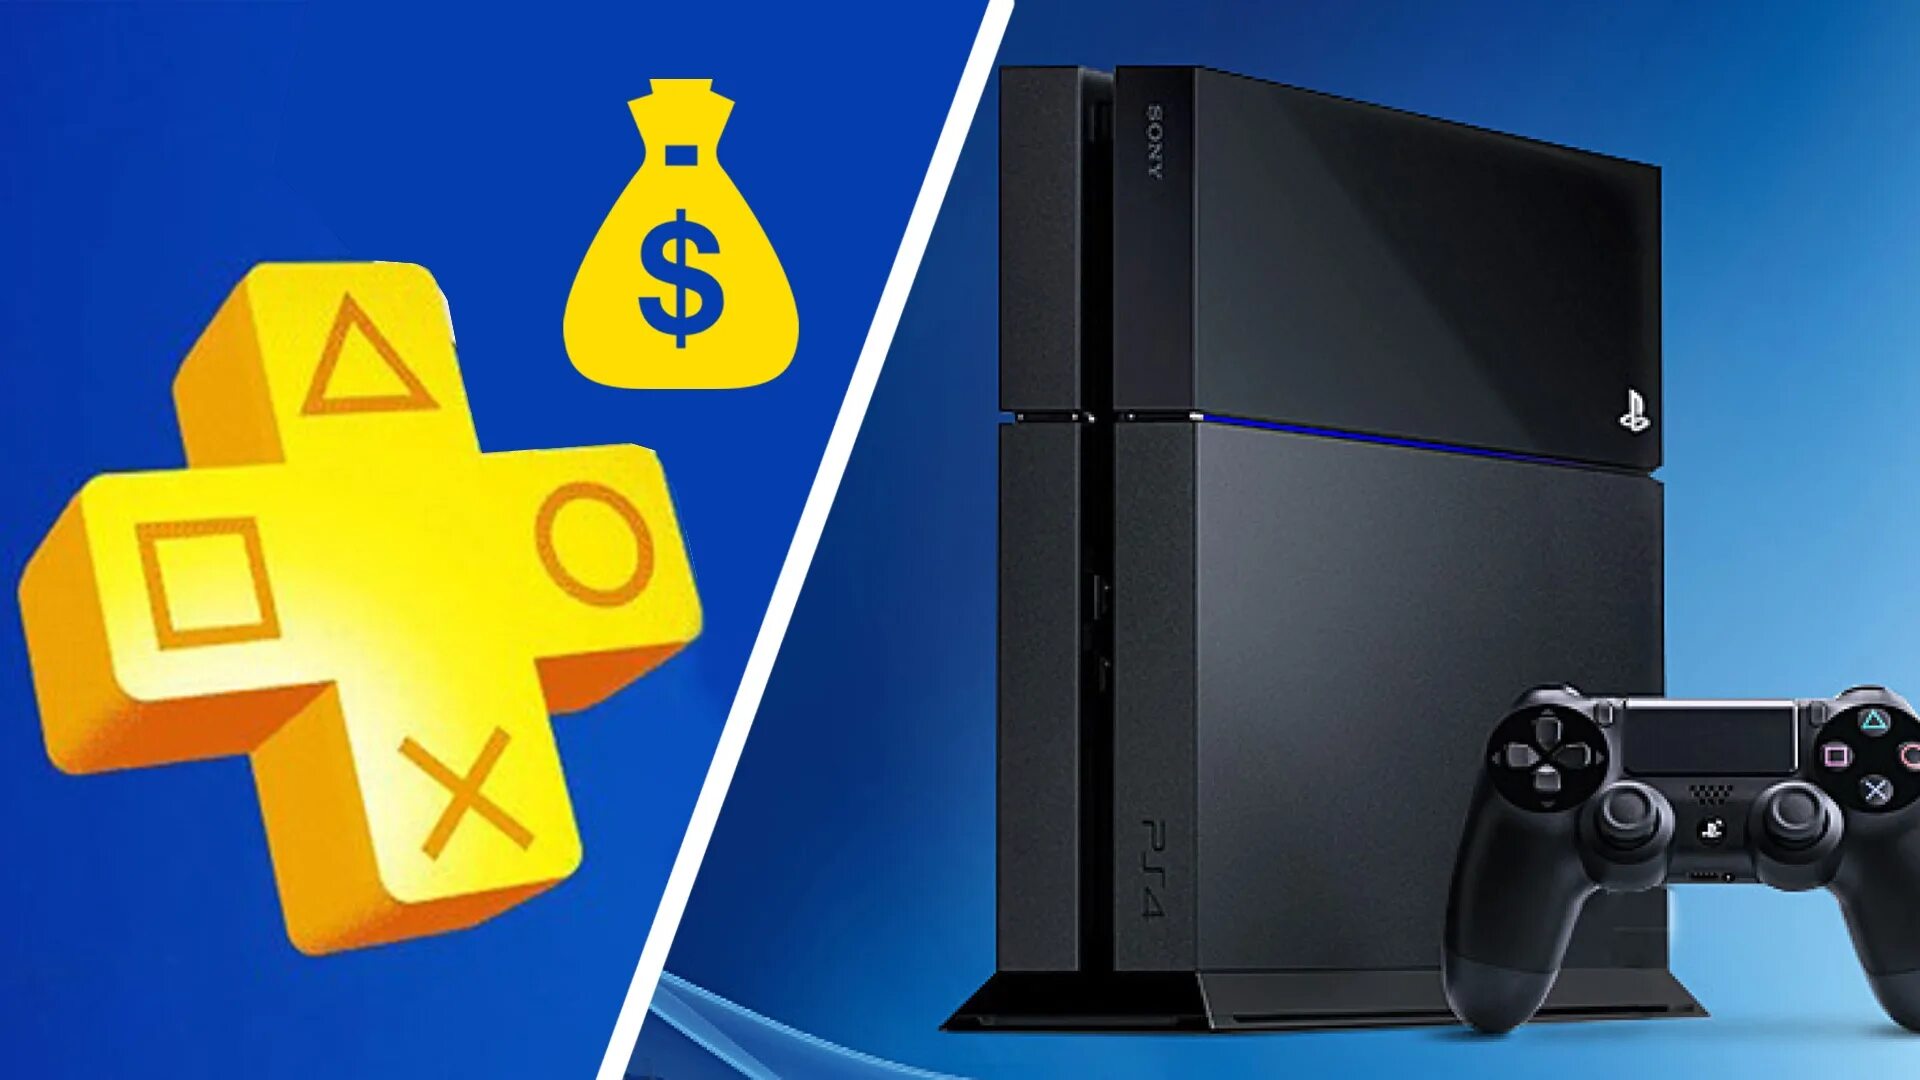 Плюсы ps5. PS Plus ps4. PS Plus ps5. Подписка PS Plus для ps4 и ps5. PS Plus Deluxe.